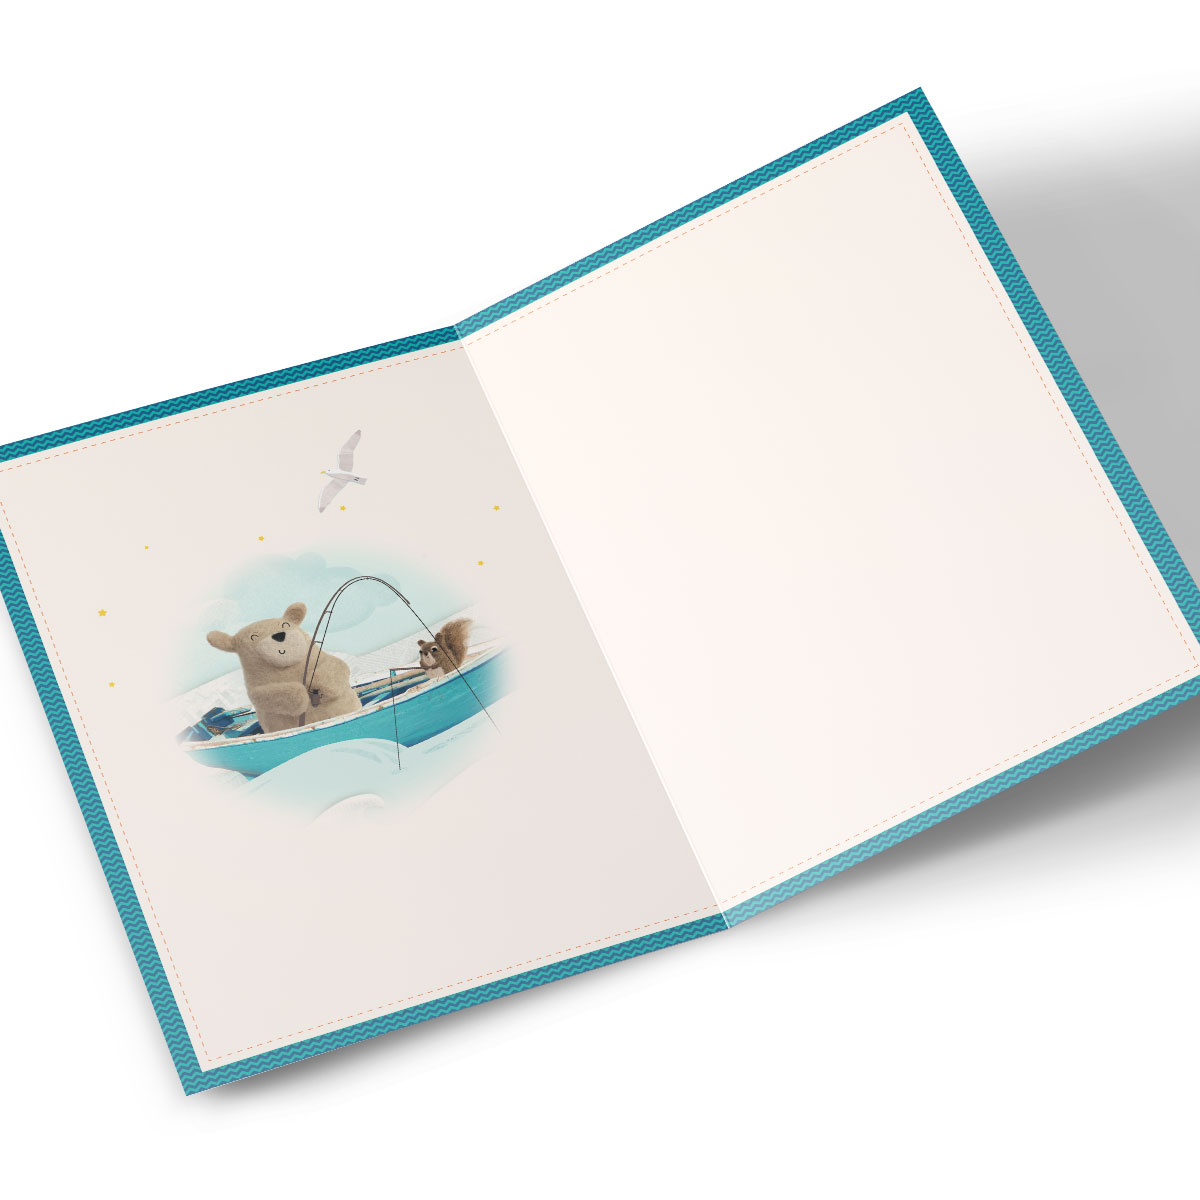 Personalised Father's Day Card - Fishing With Dad